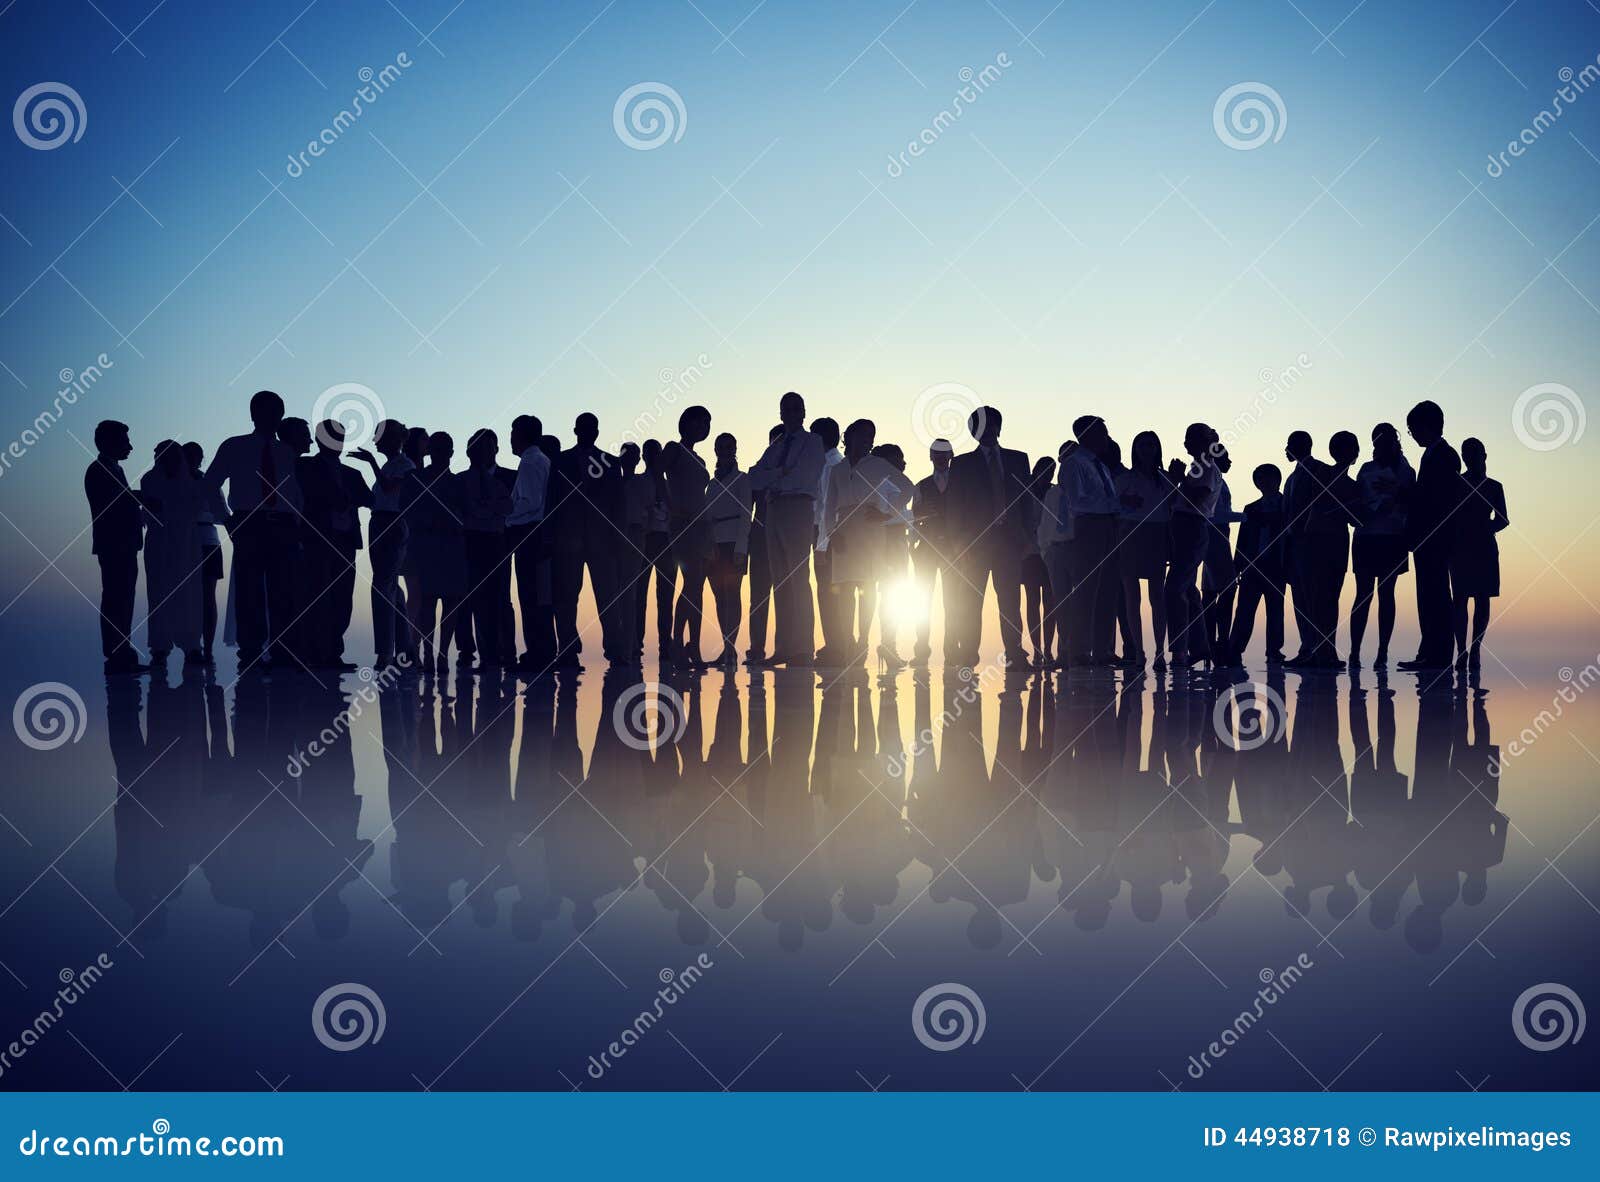 silhouettes of business people gathering outdoors